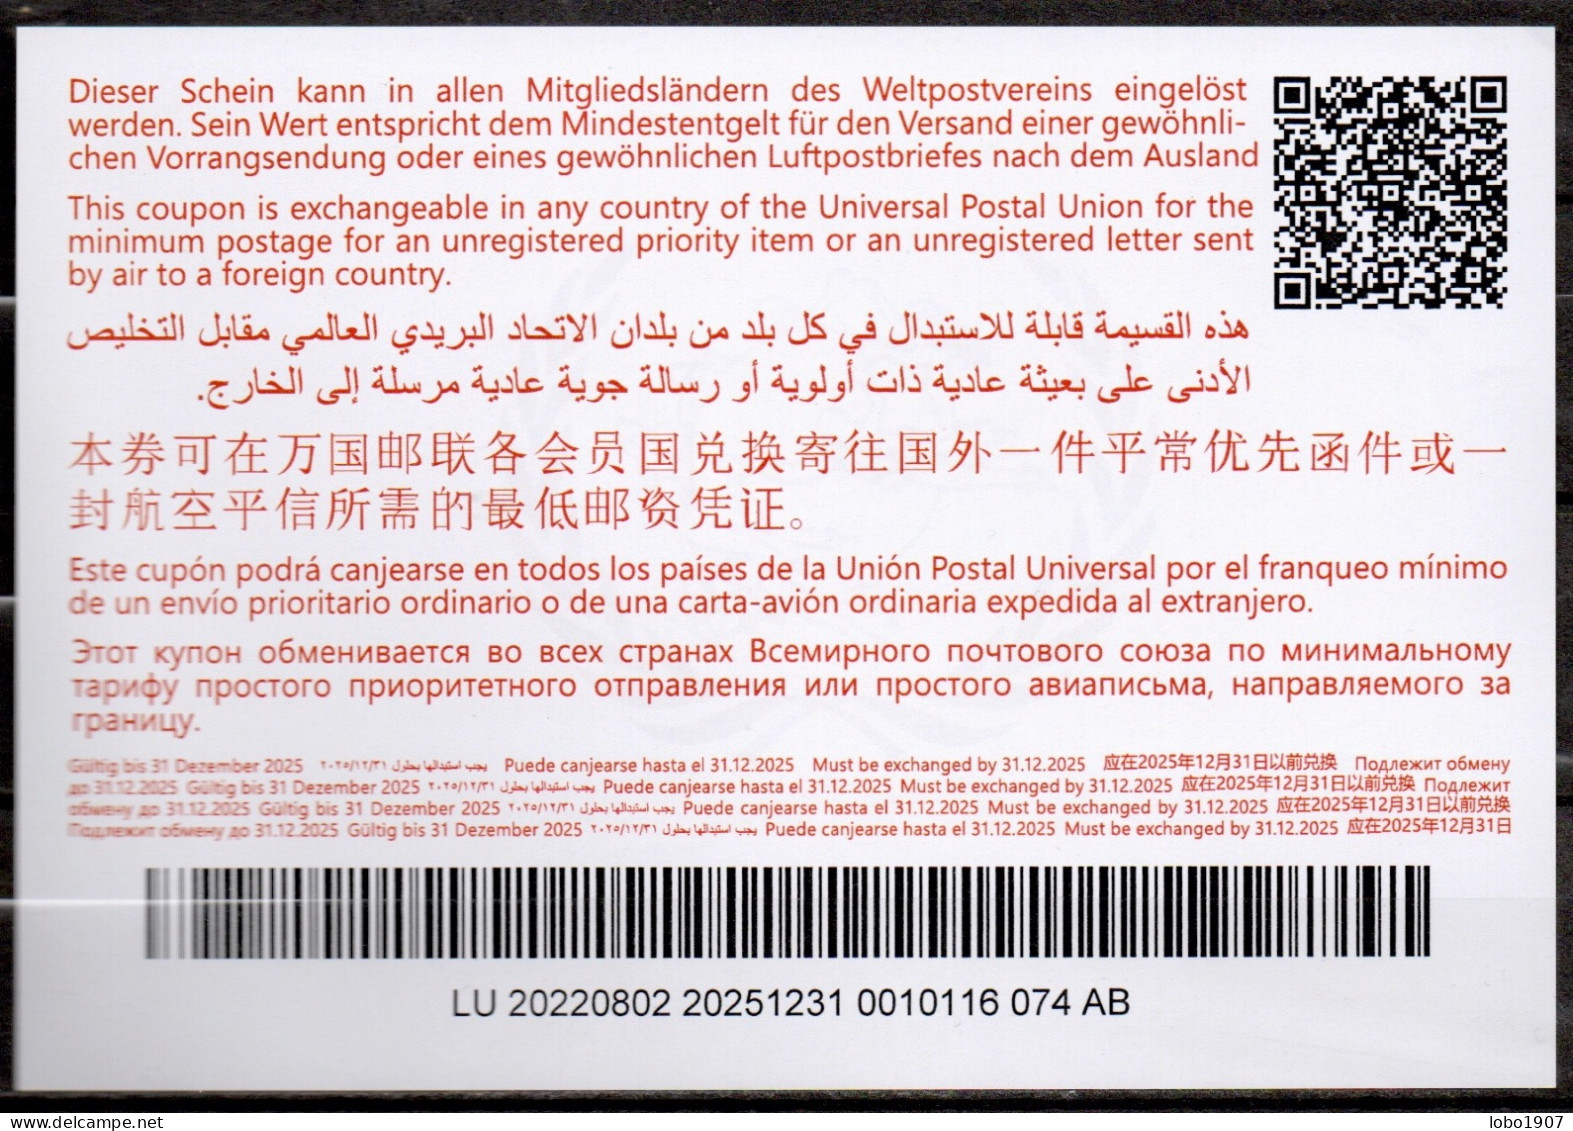 LUXEMBOURG  Abidjan Special Issue  Ab49  20220802 AB  International Reply Coupon Reponse Antwortschein IRC IAS  Mint ** - Stamped Stationery